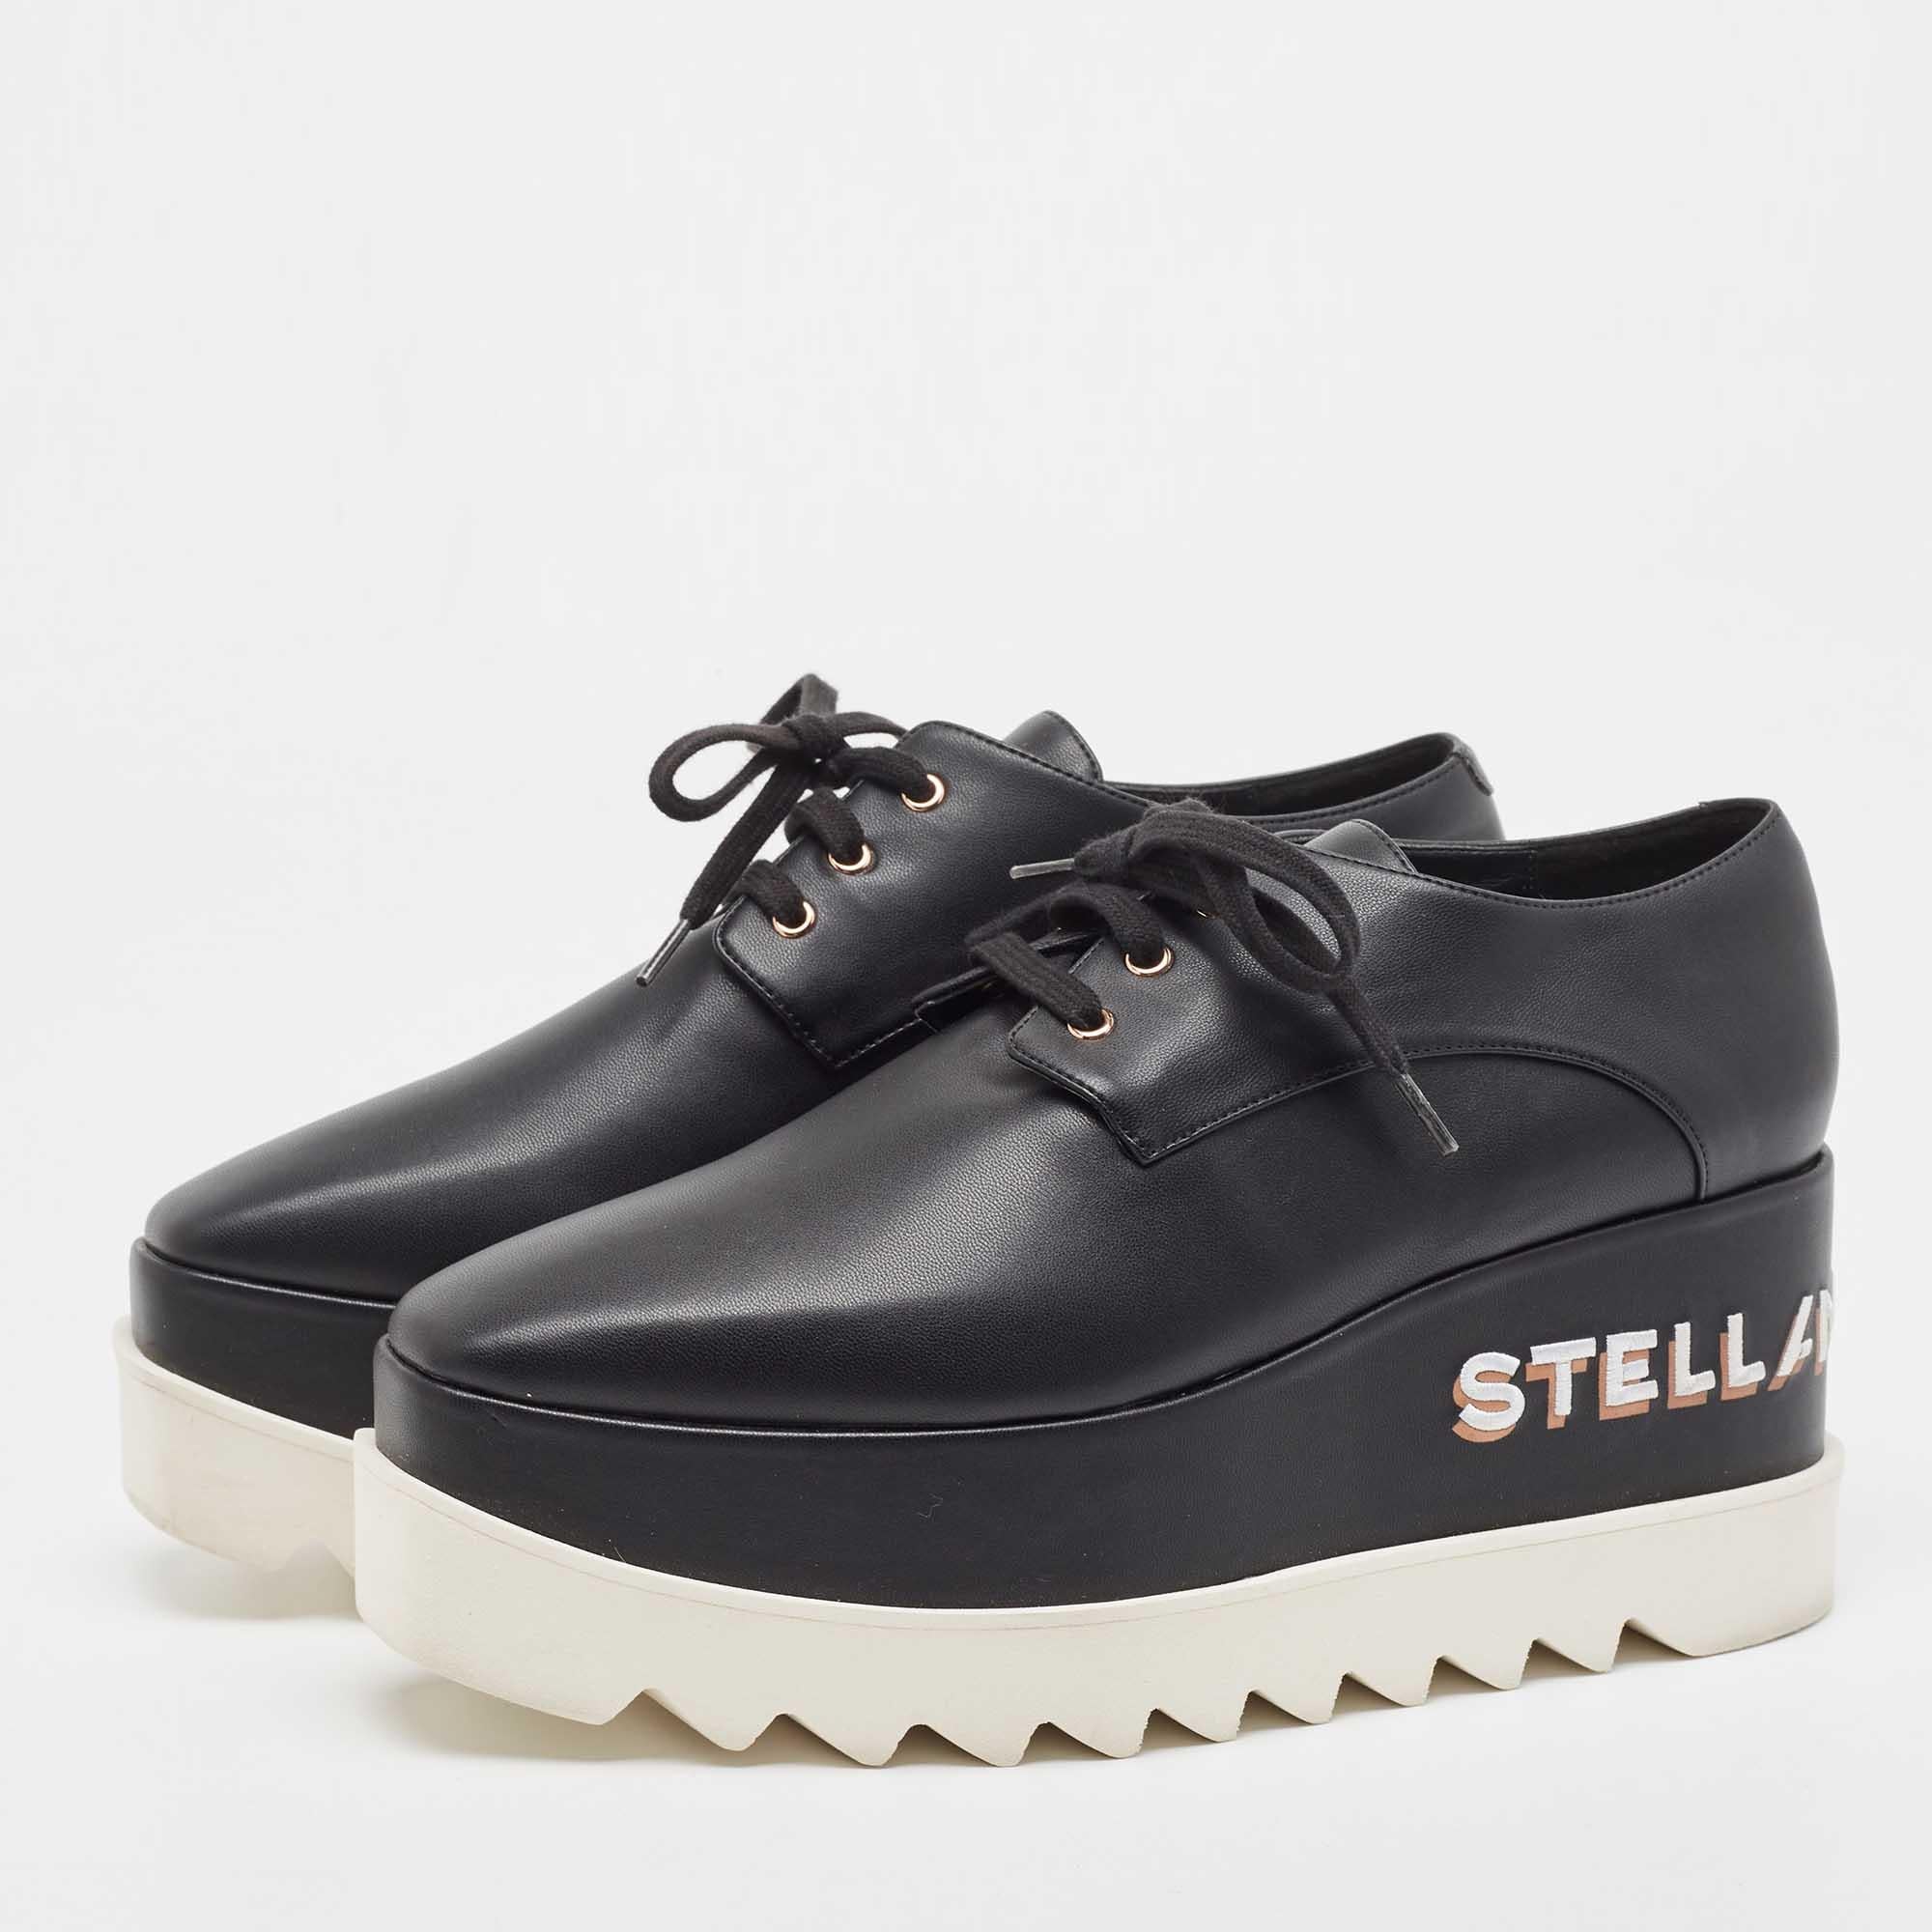 Stella McCartney exudes her high style and unique fashion taste with these Elyse derby shoes. They are brimming with exquisite details and has a faux leather exterior, laces, and thick platforms. Grab this pair today and let it help you express your